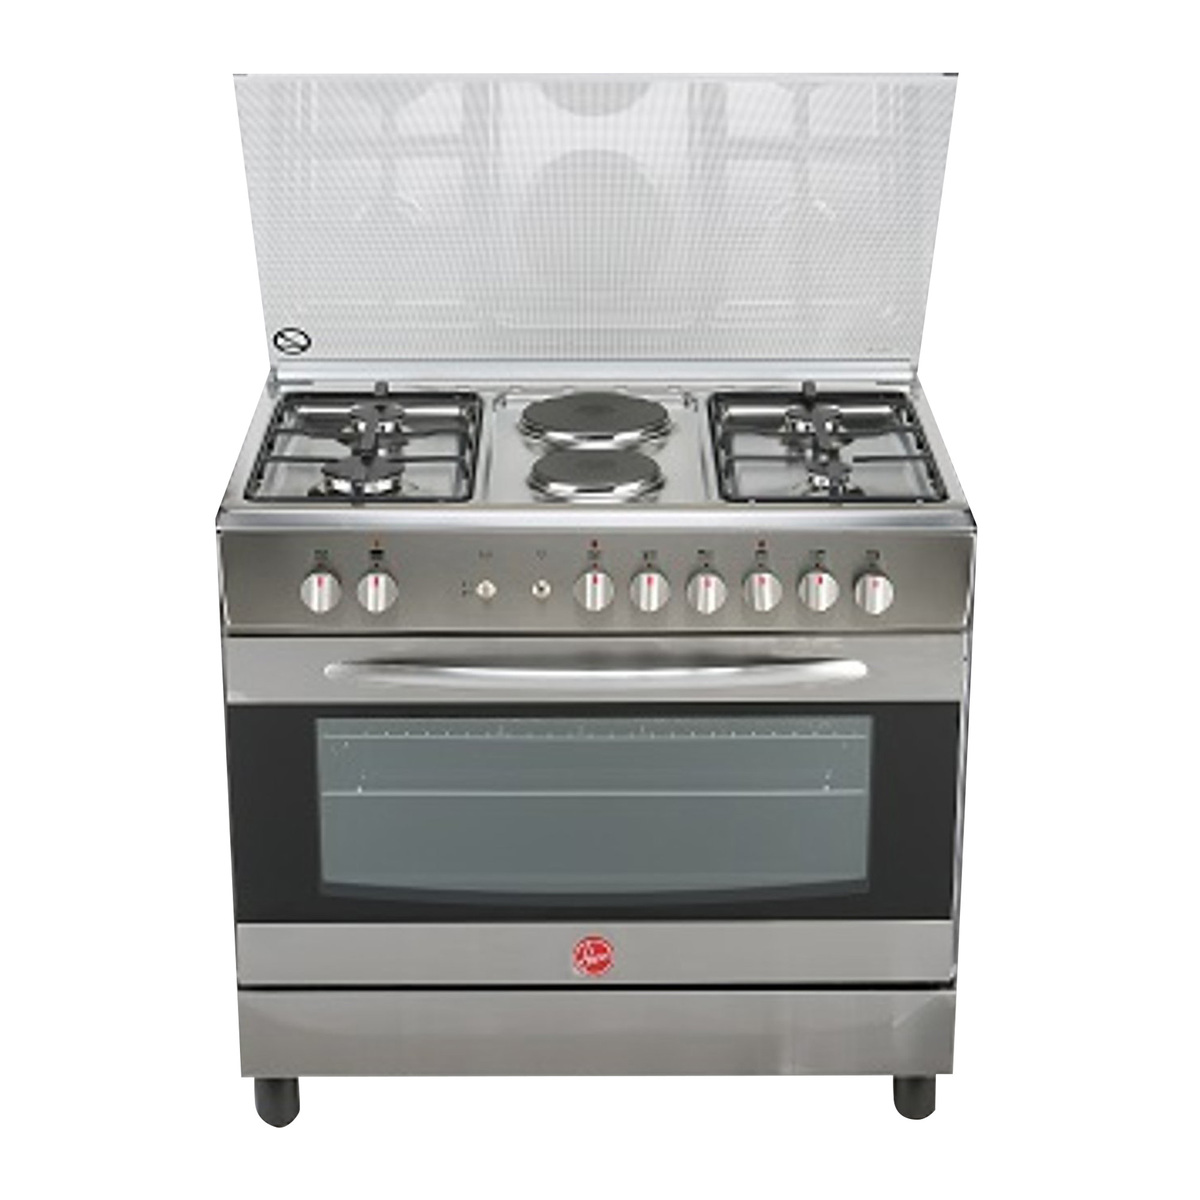 Hoover Cooker, 90 x 60 cm, Stainless Steel, MGC9062